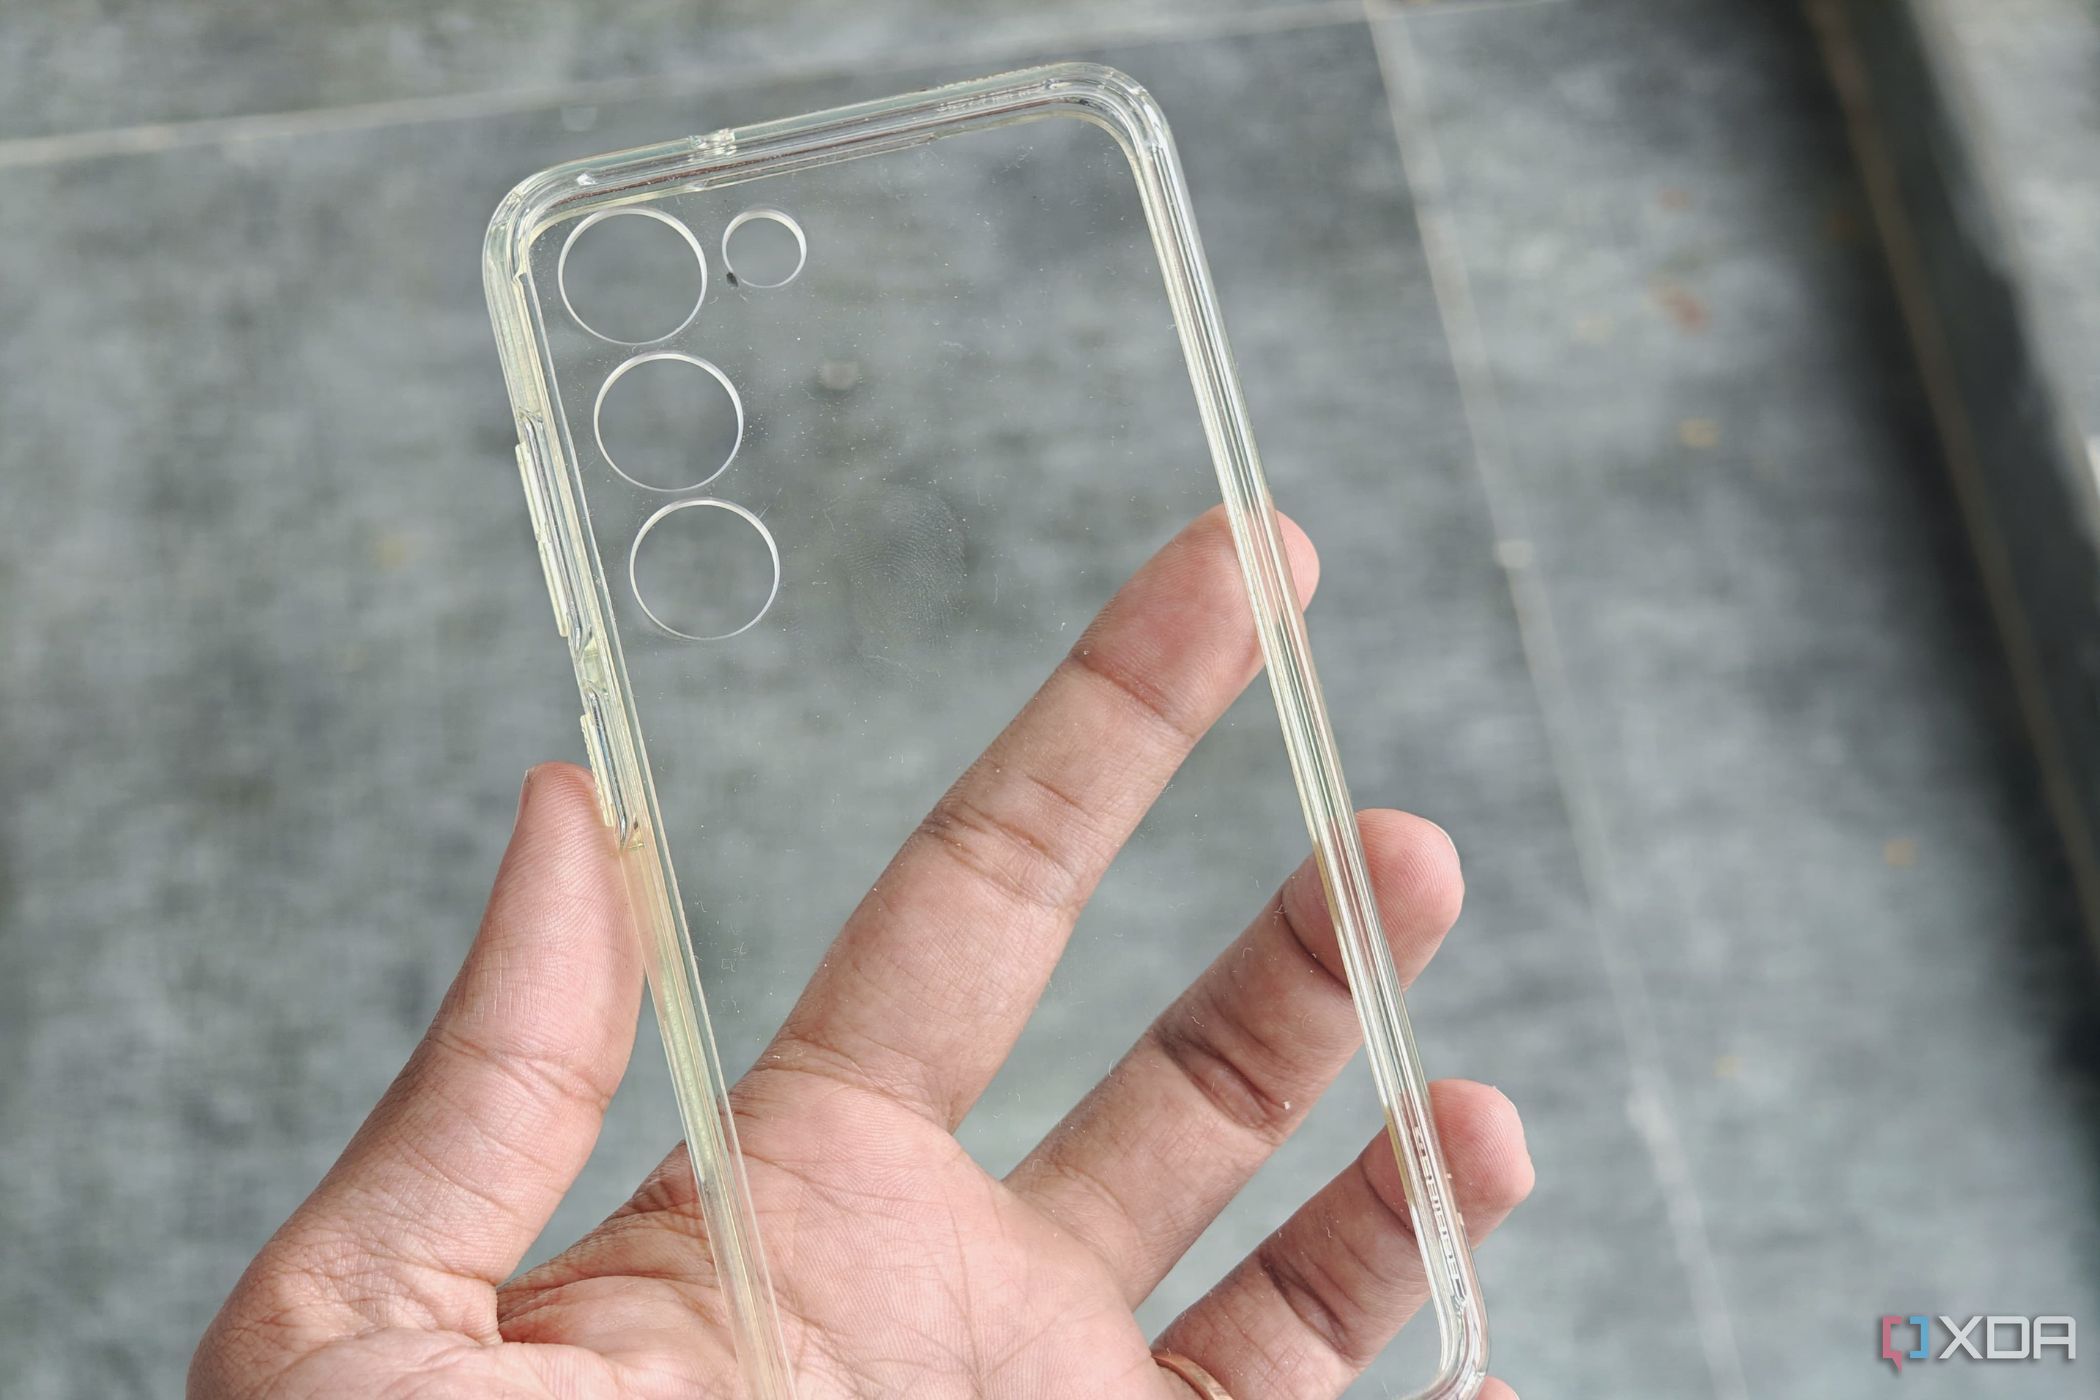 A clear case shown with a bunch of greasy fingerprints on it.